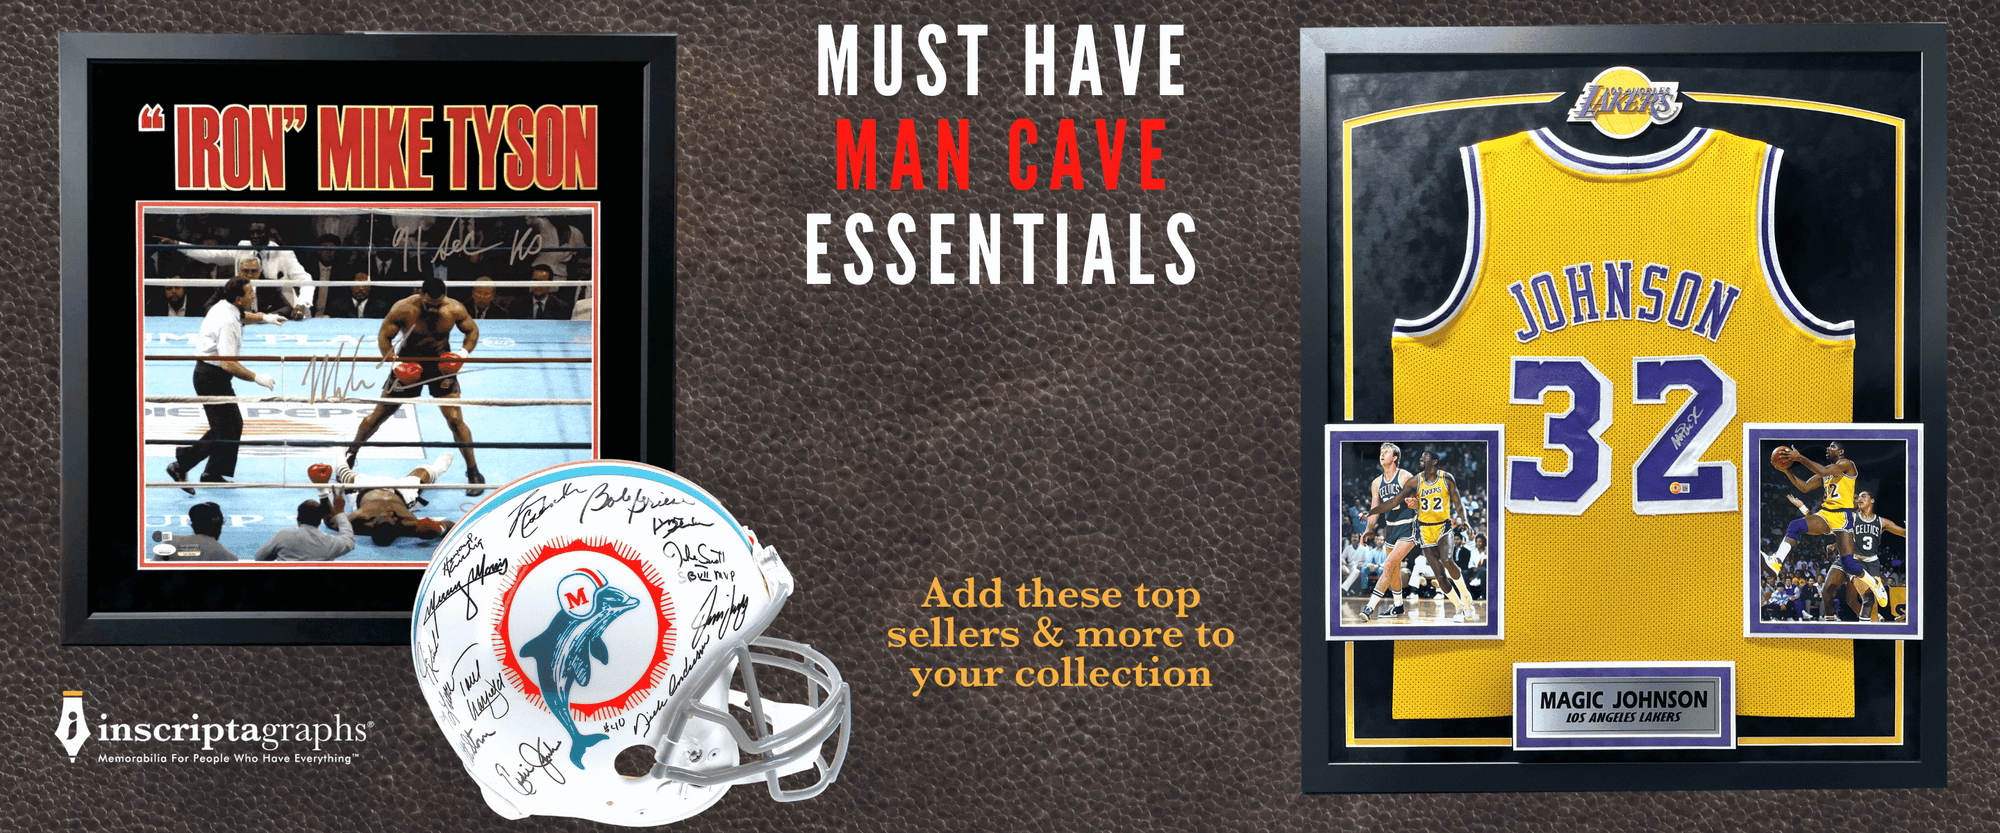 Shop Inscriptagraphs' Man Cave Essentials which are some of the best selling products on our website! You can purchase items like a 1972 Dolphins Helmet Team Signed, Mike Tyson 16x20 framed photos and a Magic Johnson signed and framed Lakers Jersey! Click this banner to shop more best sellers!